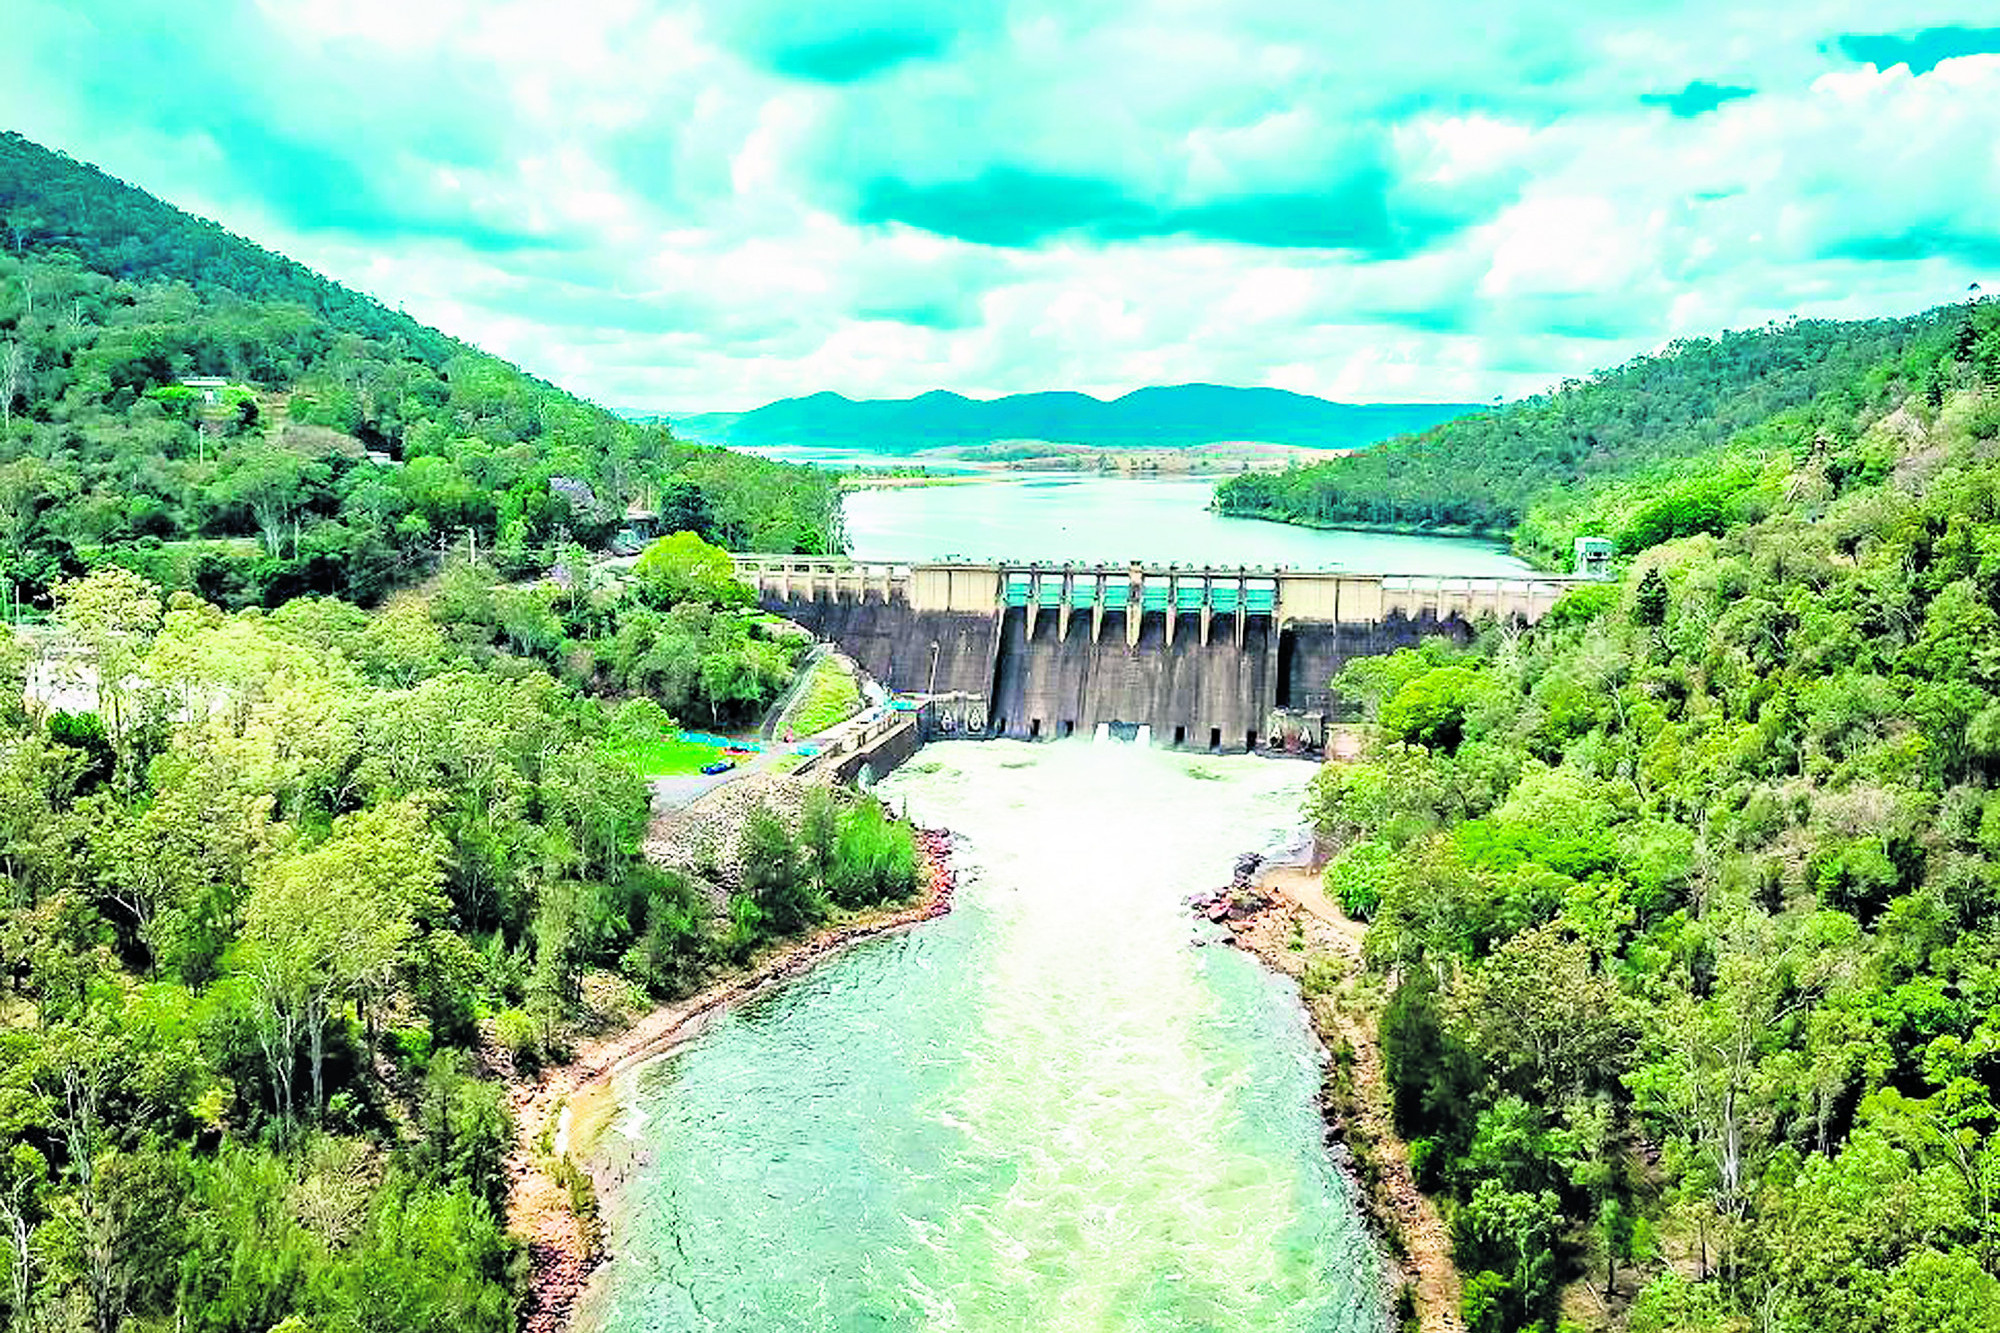 Gate releases commence from Somerset Dam - feature photo